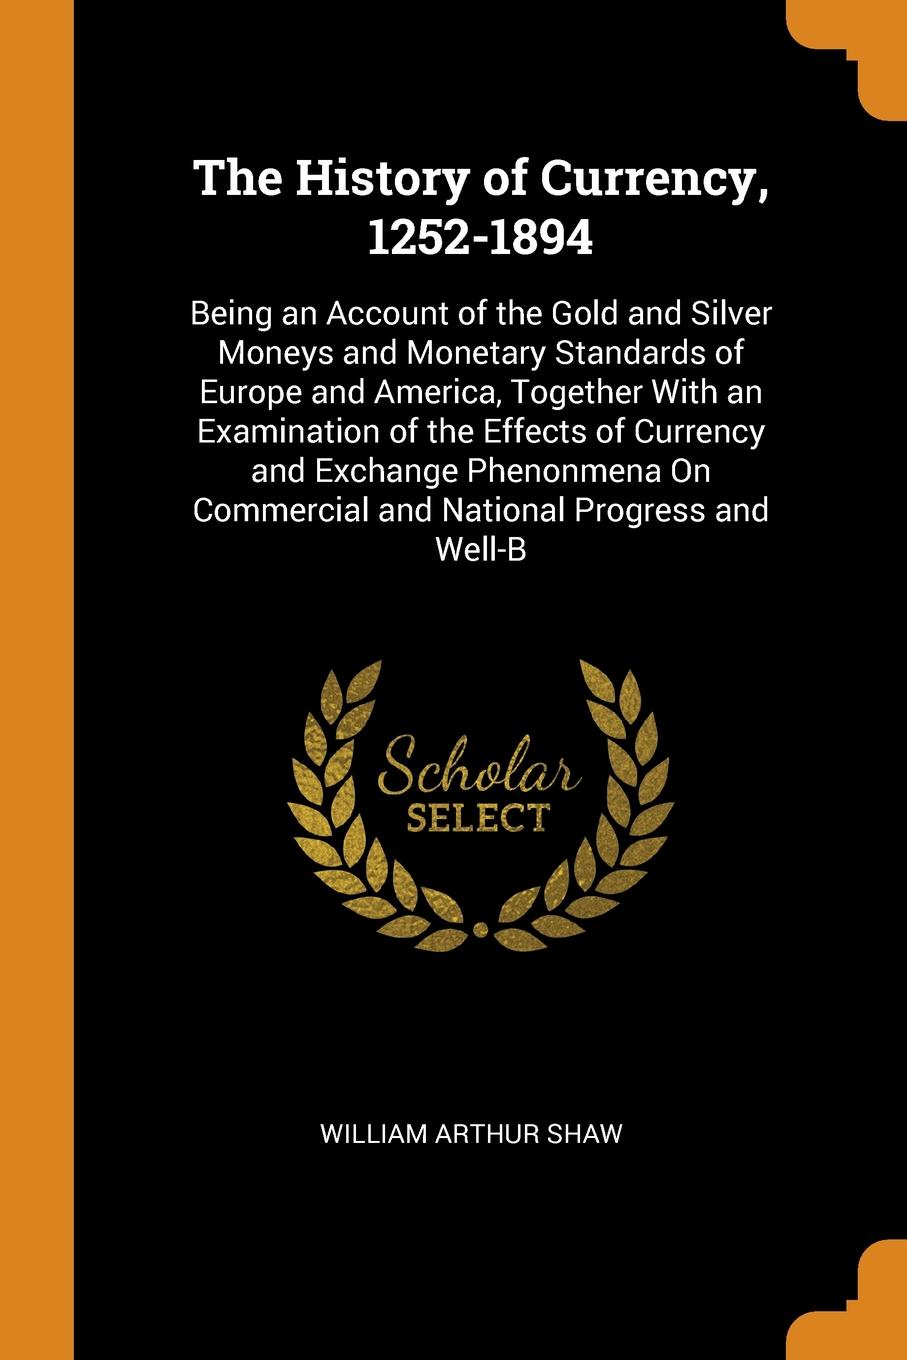 The History of Currency, 1252-1894. Being an Account of the Gold and Silver Moneys and Monetary Standards of Europe and America, Together With an Examination of the Effects of Currency and Exchange Phenonmena On Commercial and National Progress an...